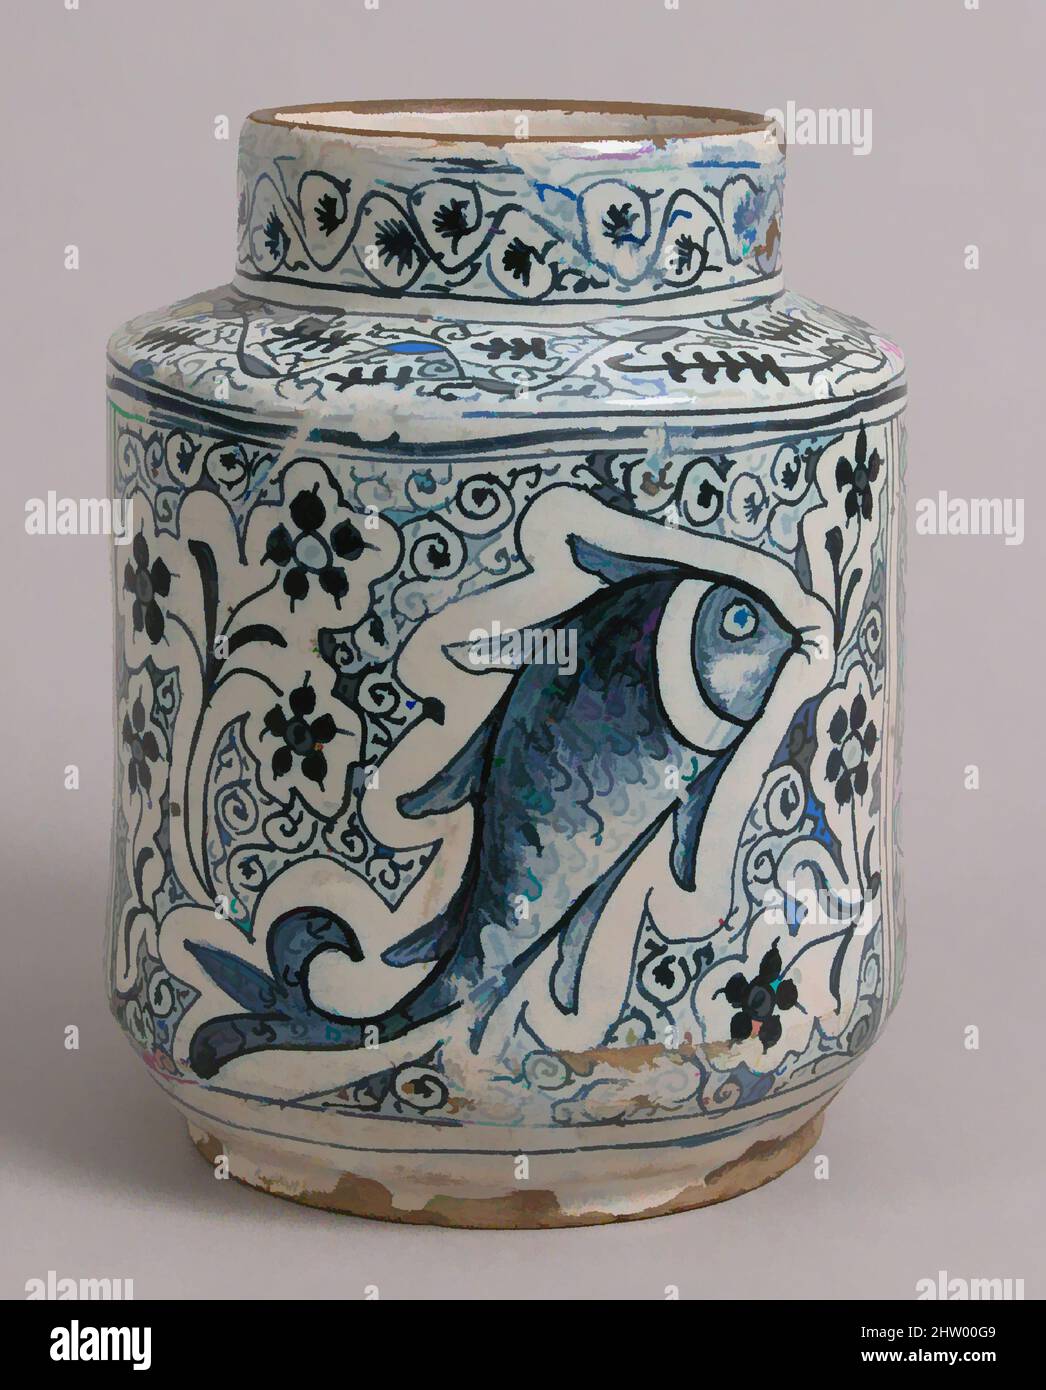 Art inspired by Pharmacy Jar, 1400s, Made in Florence, Tuscany, Italy, Italian, Tin-glazed earthenware, Overall: 9 x 7 3/16 in. (22.9 x 18.3 cm), Ceramics, Maiolica storage jars for Italian pharmacies were highly decorative and frequently combined animal and floral motifs, as, Classic works modernized by Artotop with a splash of modernity. Shapes, color and value, eye-catching visual impact on art. Emotions through freedom of artworks in a contemporary way. A timeless message pursuing a wildly creative new direction. Artists turning to the digital medium and creating the Artotop NFT Stock Photo